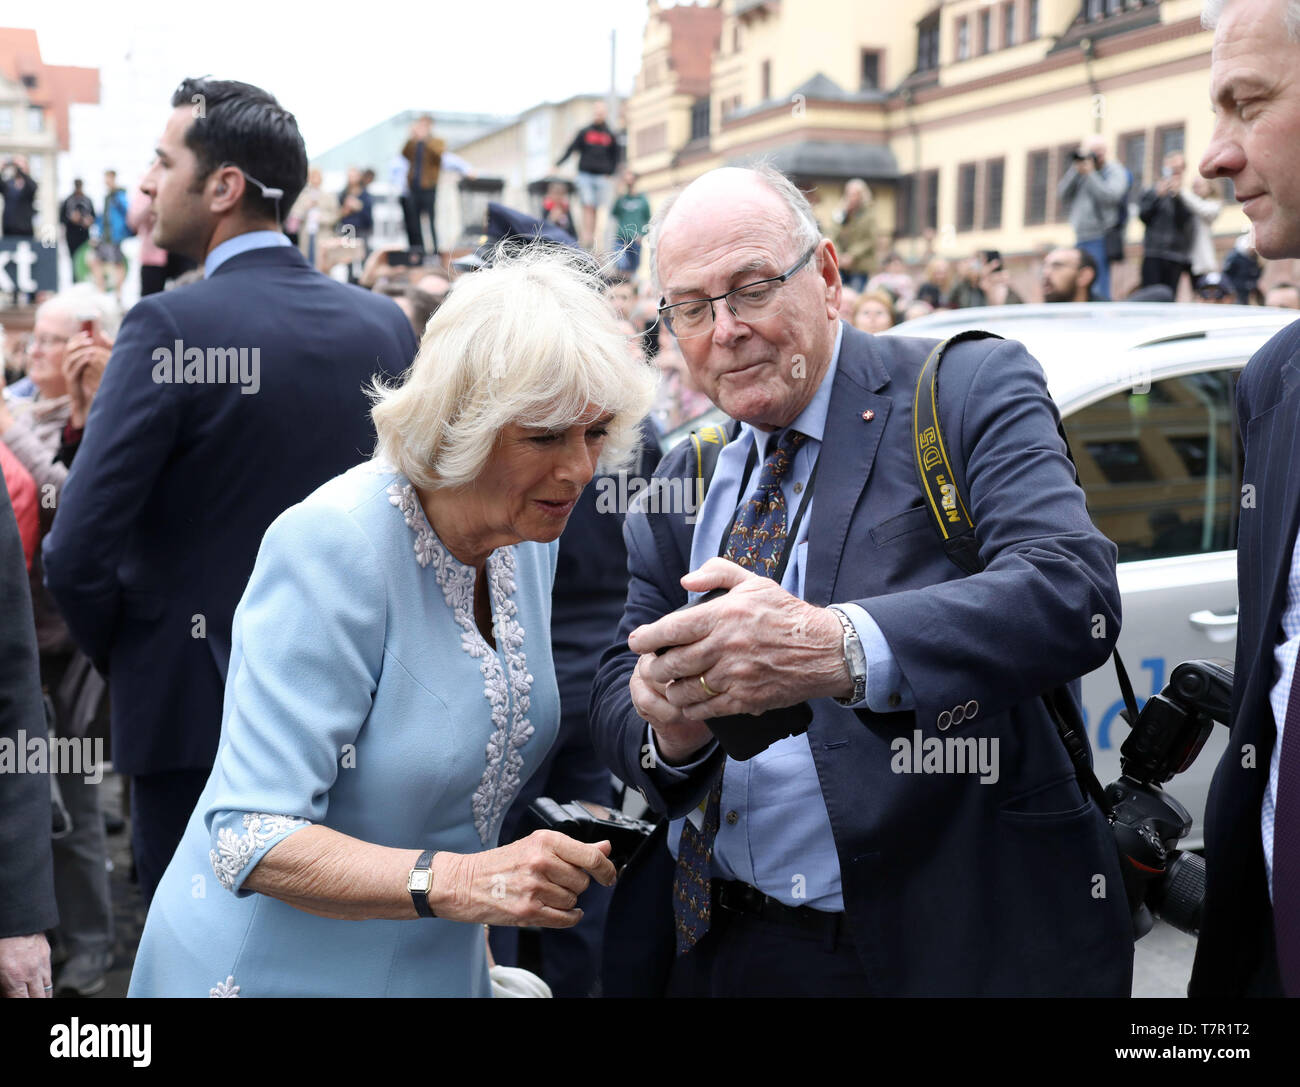 royal-sun-photographer-arthur-edwards-shows-the-duchess-of-cornwall-an-image-of-prince-harrys-new-baby-on-his-phone-during-the-visit-to-leipzig-city-hall-on-the-second-day-of-their-tour-of-germany-T7R1T2.jpg